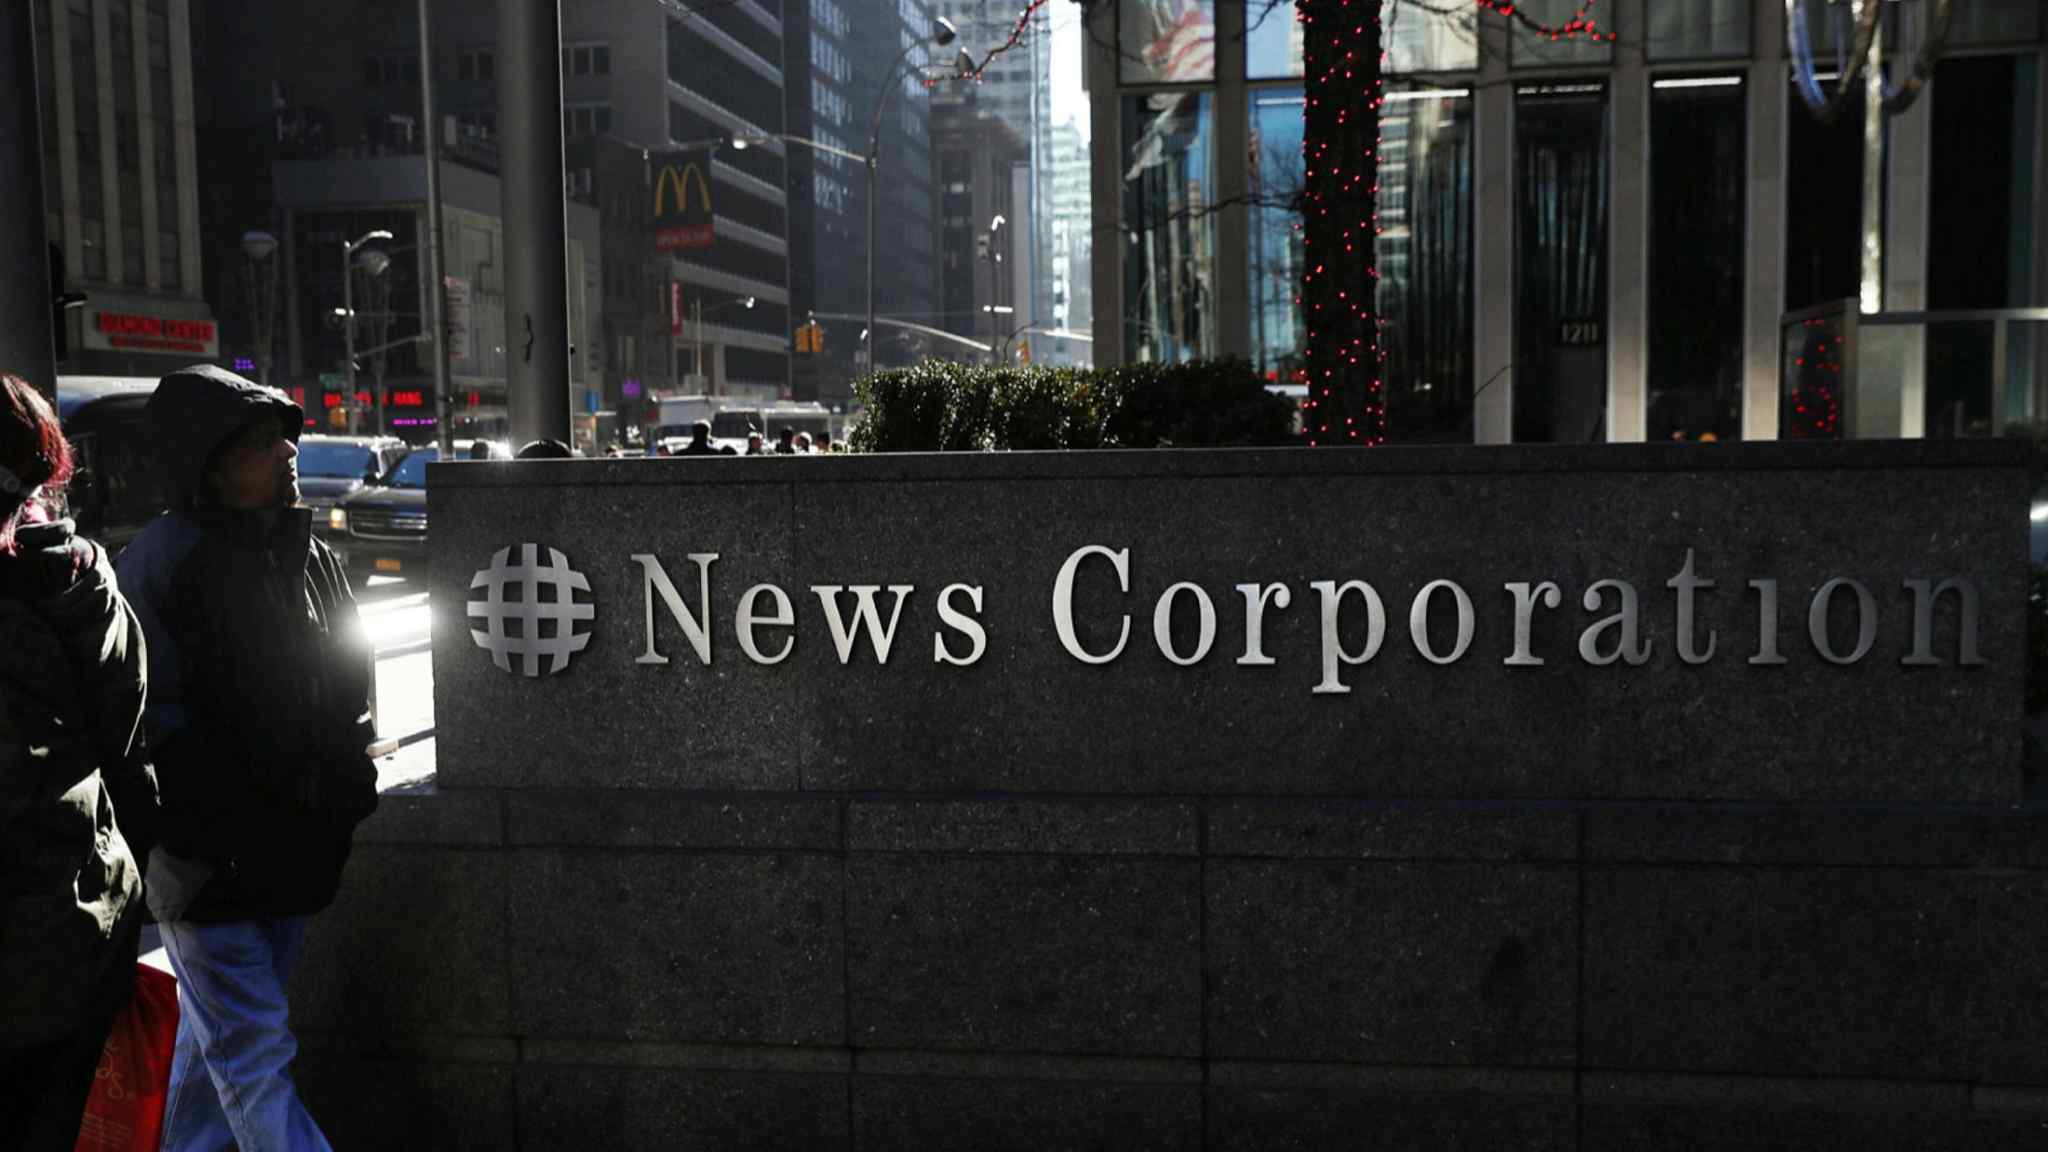 Former New York Post editor claims harassment in News Corp lawsuit